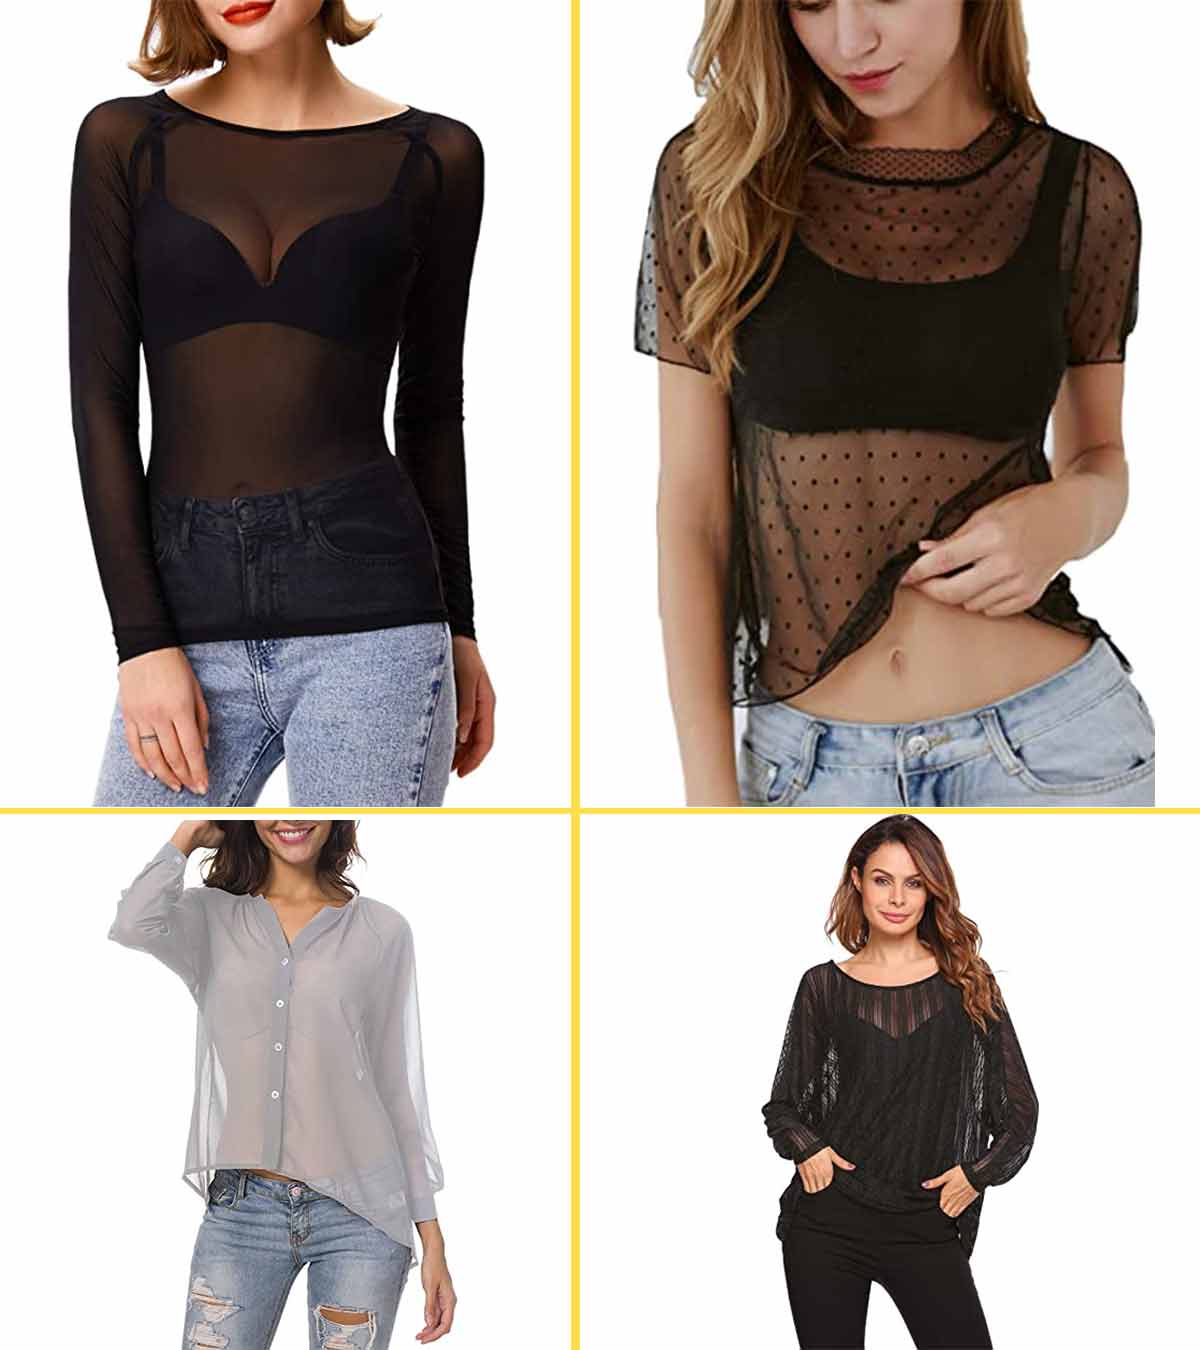 danyelle stanfield recommends girls in see through tops pic